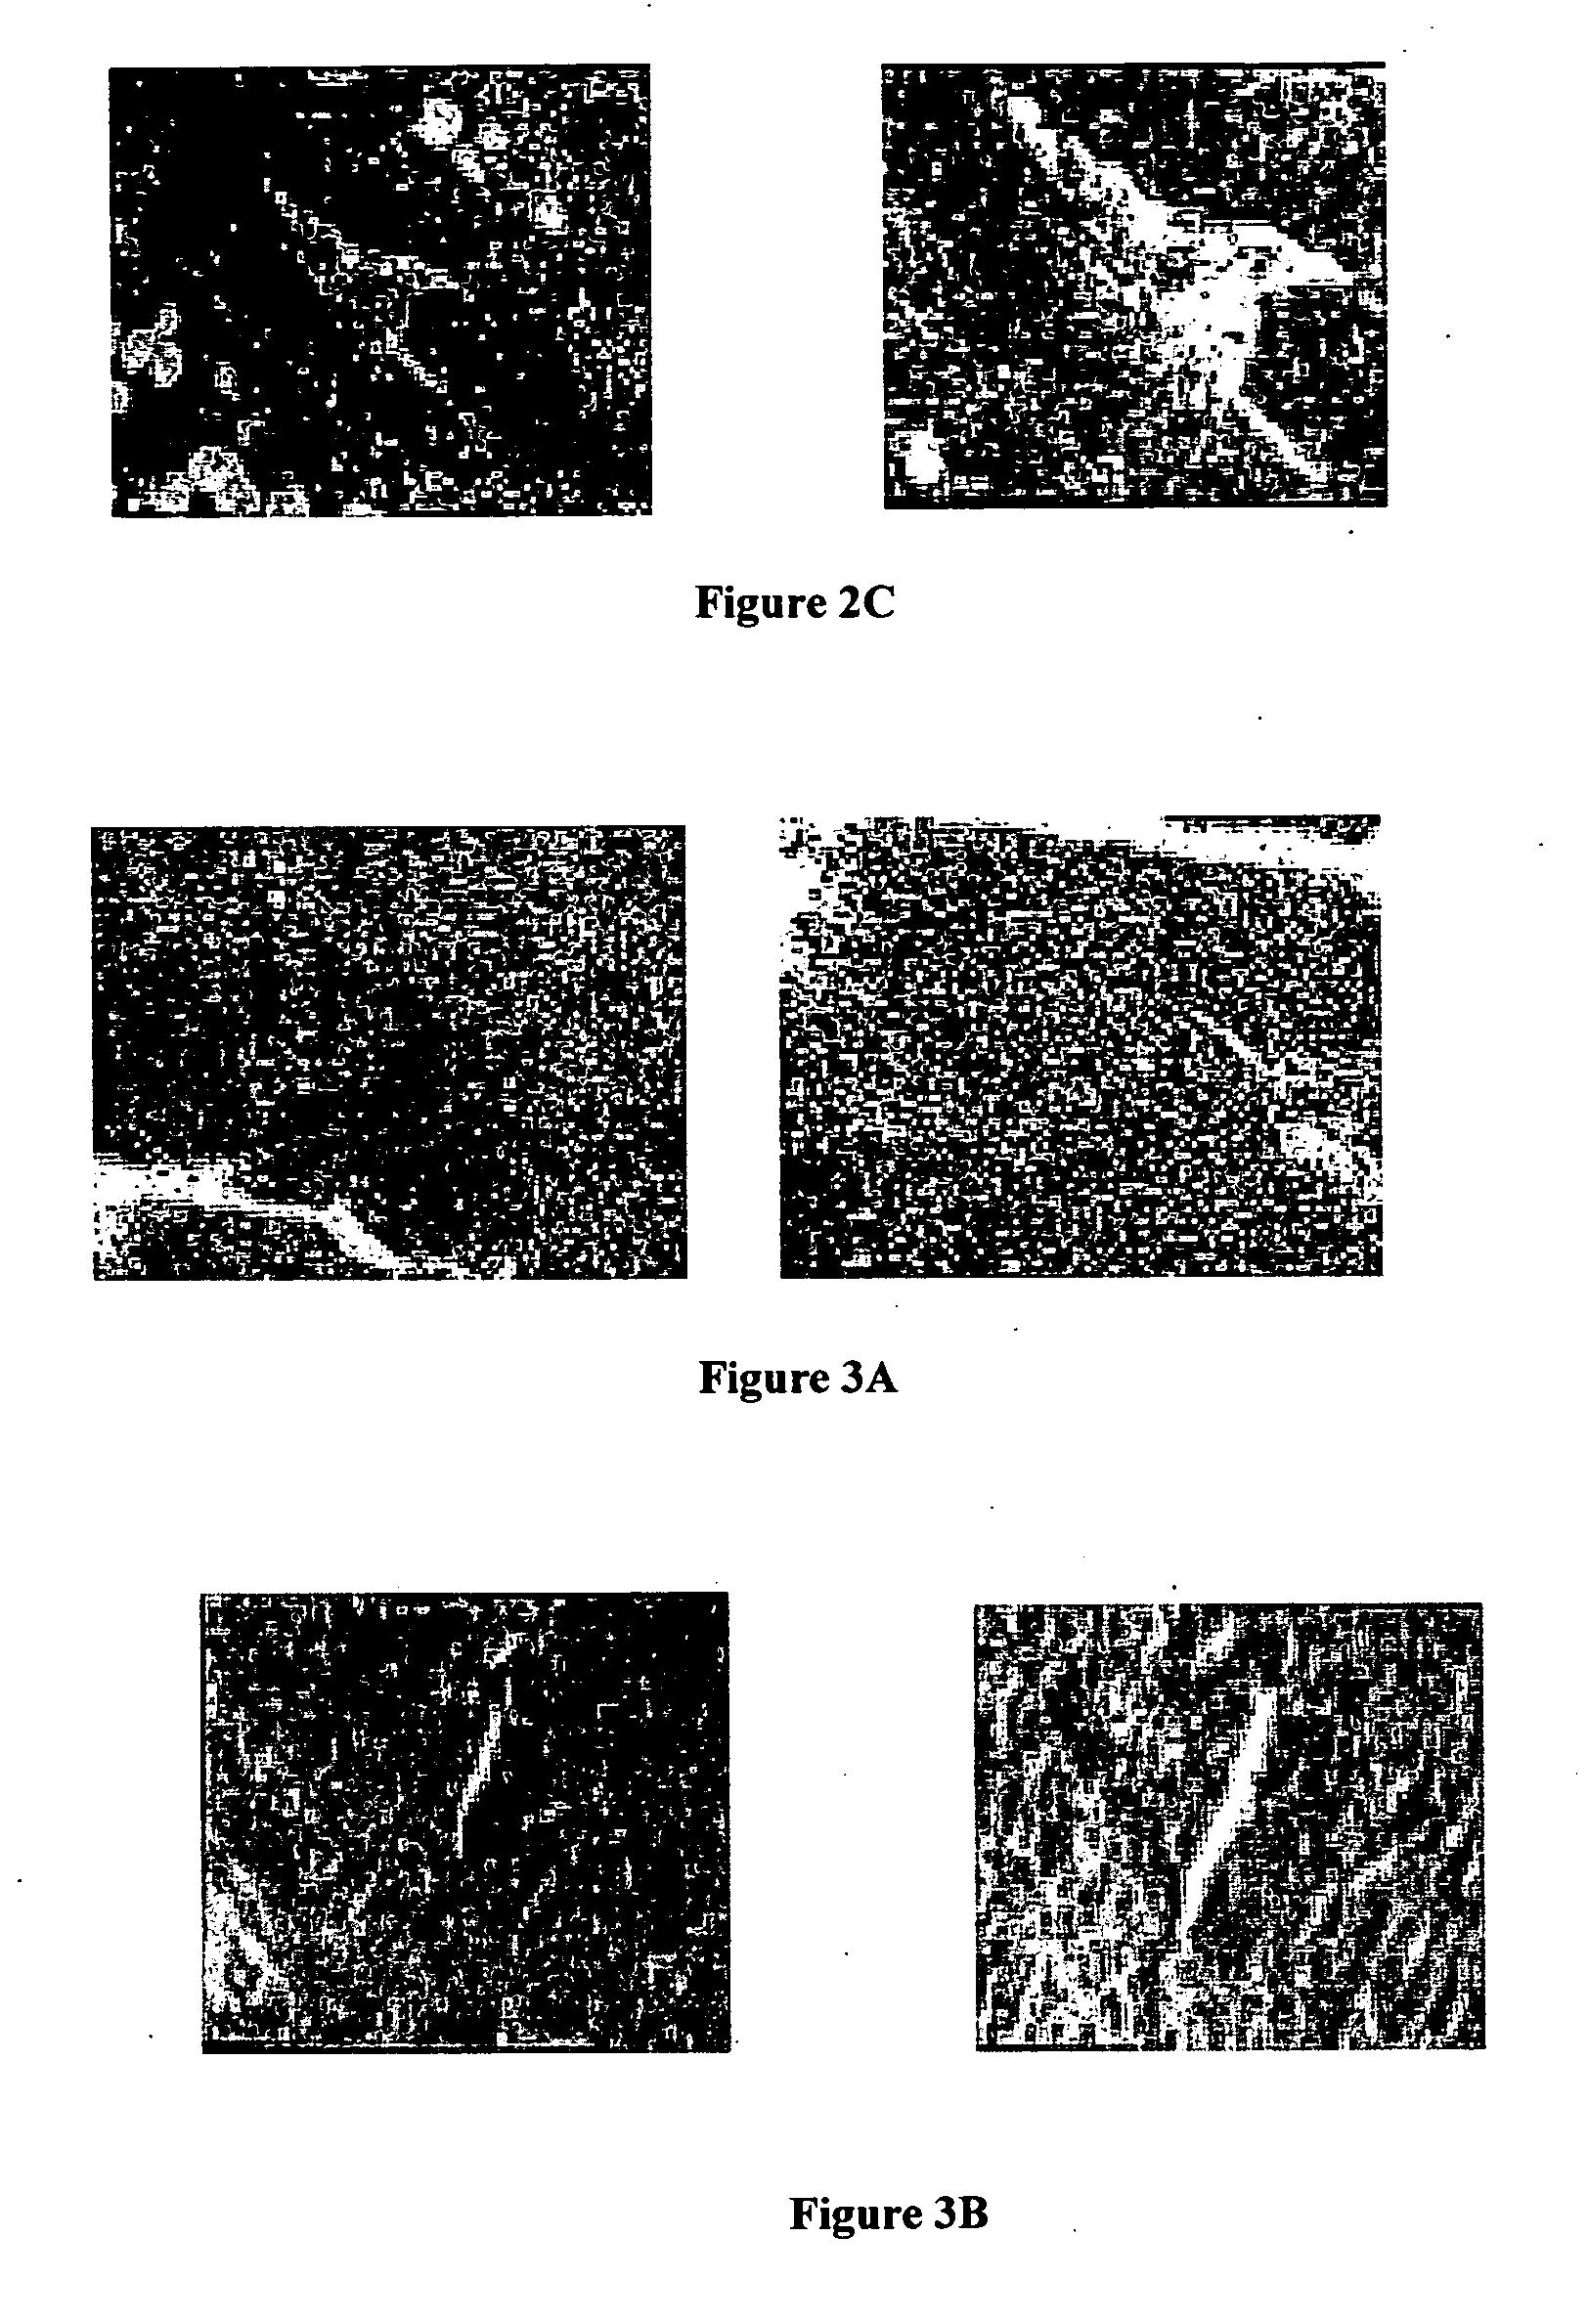 Method, reagent, and device for embolizing blood vessels in tumors with ultrasonic radiation micro-bubble reagent